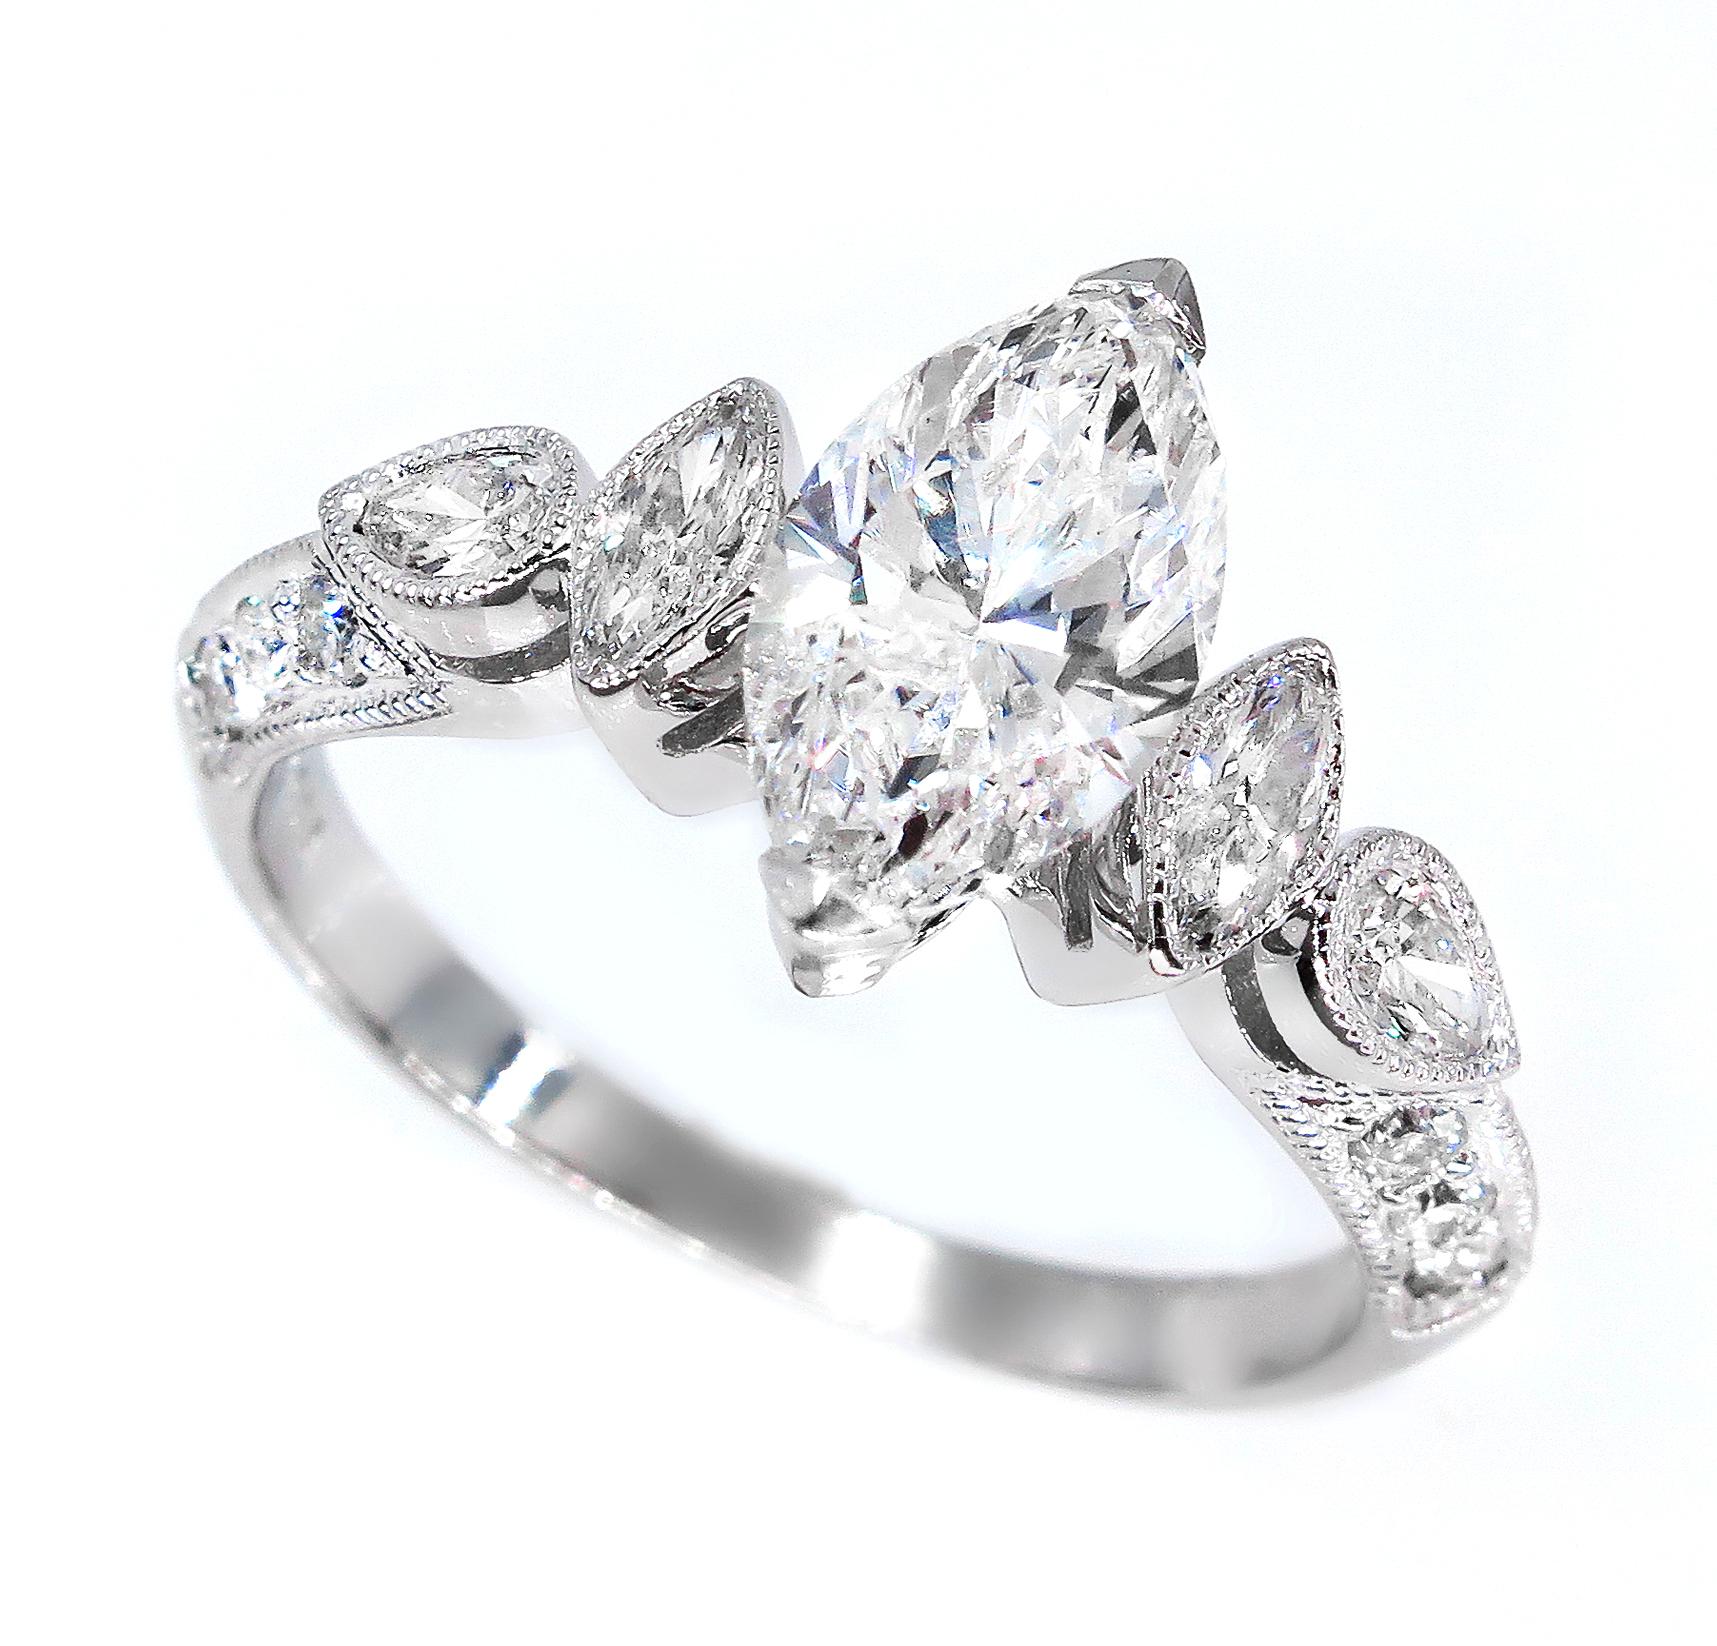 There is nothing more ELEGANT than this exquisite VINTAGE Style MARQUISE Diamond ring!
The main attraction of this Dazzler is the center Marquise Cut Diamond, weighing 1.12ct, G color, I1 clarity GIA CERTIFIED. GREAT CUT and AMAZING BRILLIANCE! Icy